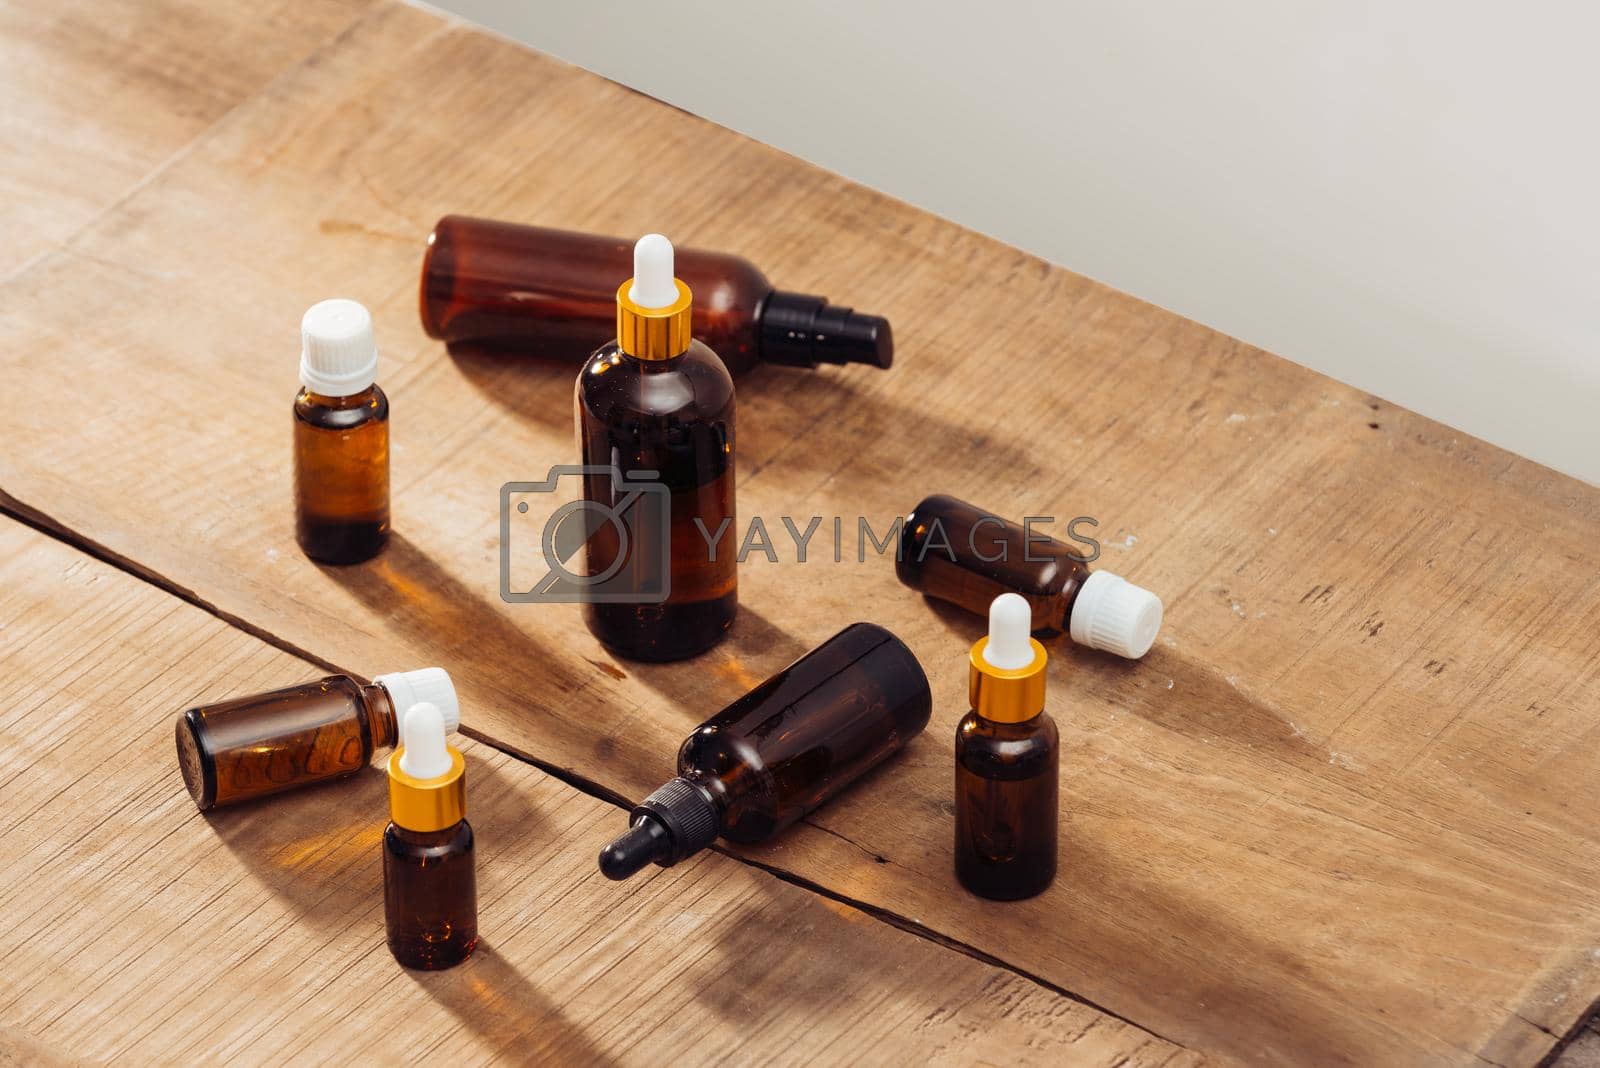 Royalty free image of Essential oils bottles on wooden desk with candlelight beside. Spa wellness set. by makidotvn